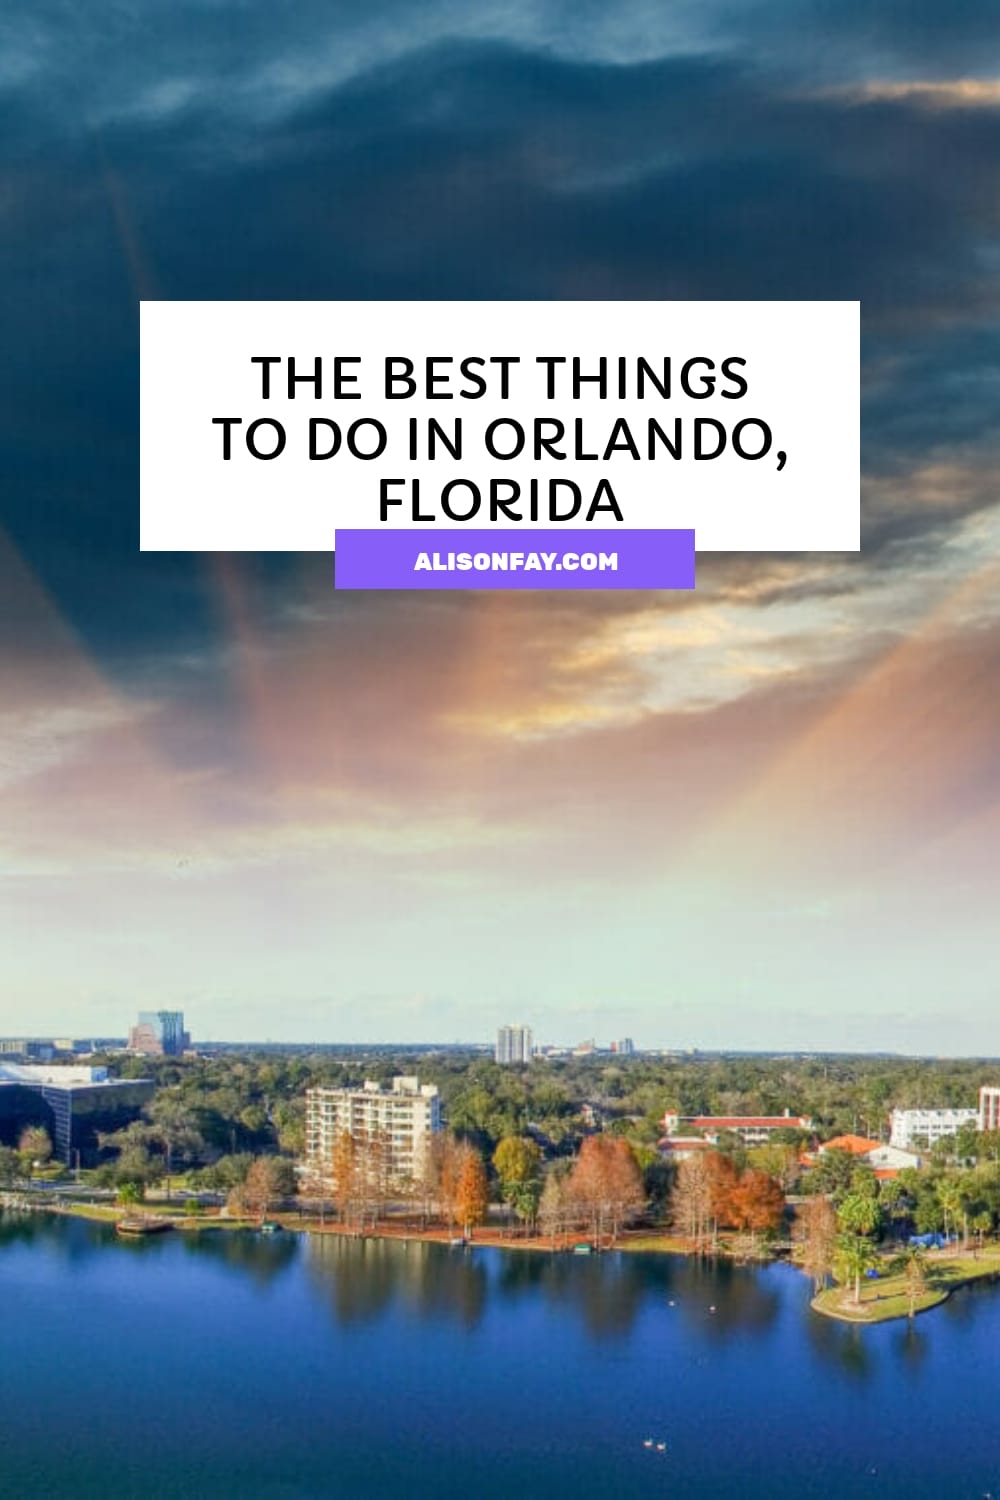 The Best Things to do in Orlando, Florida